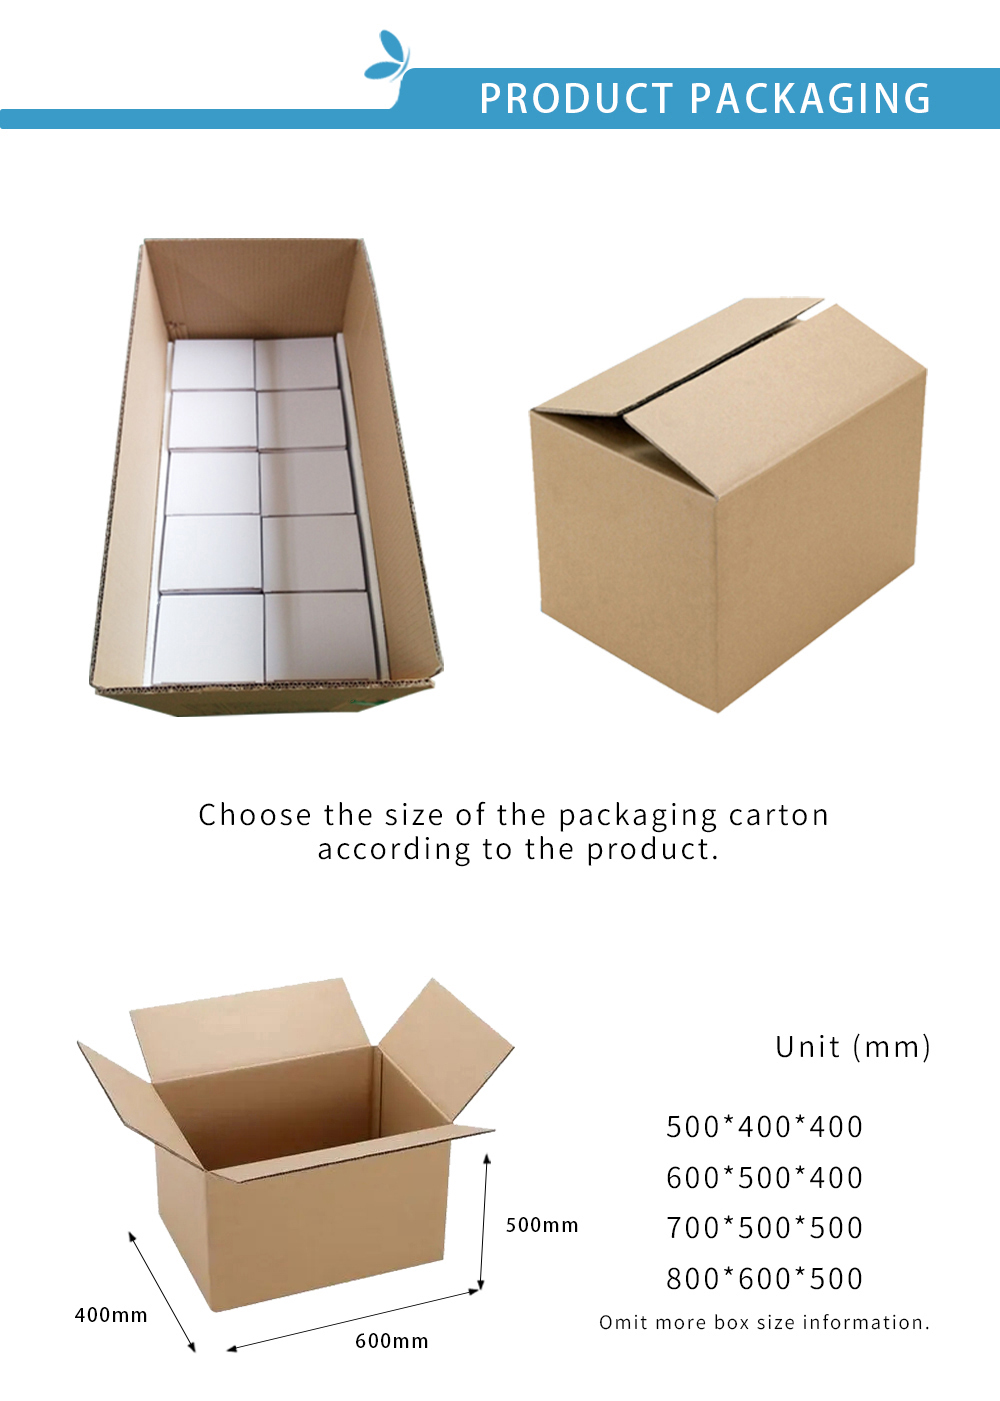 3. Color changing lipstick packaging box